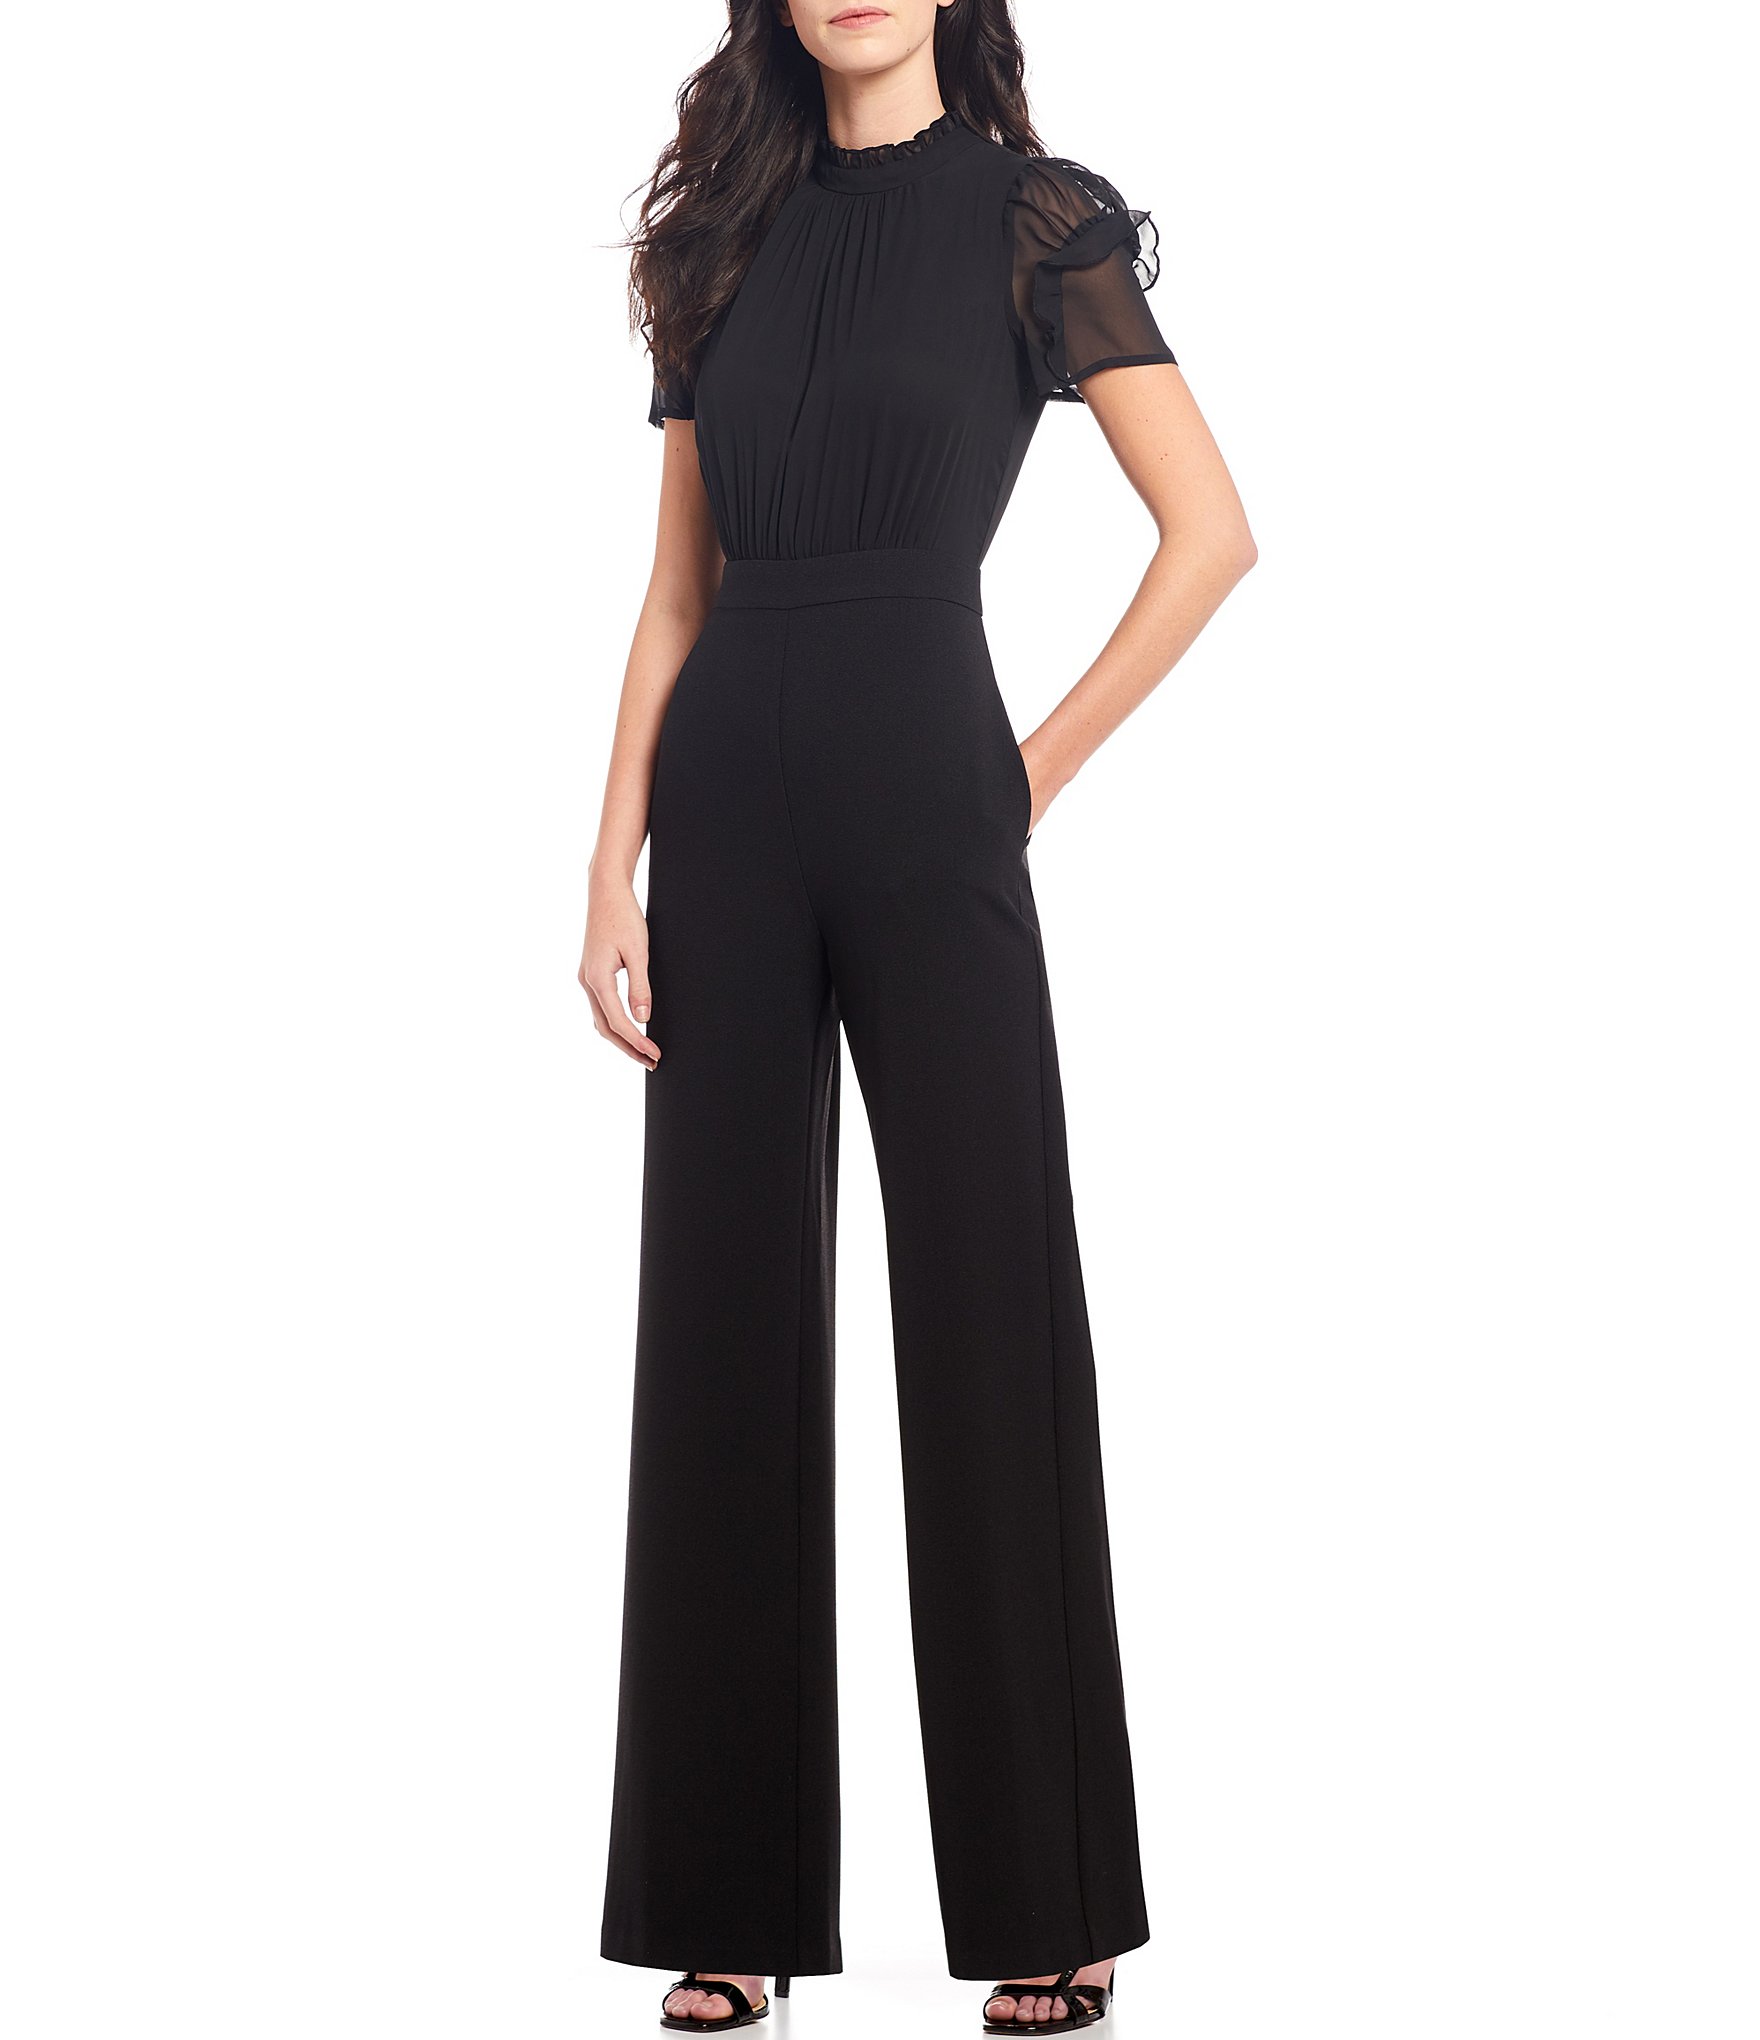 dressy jumpsuits with sleeves